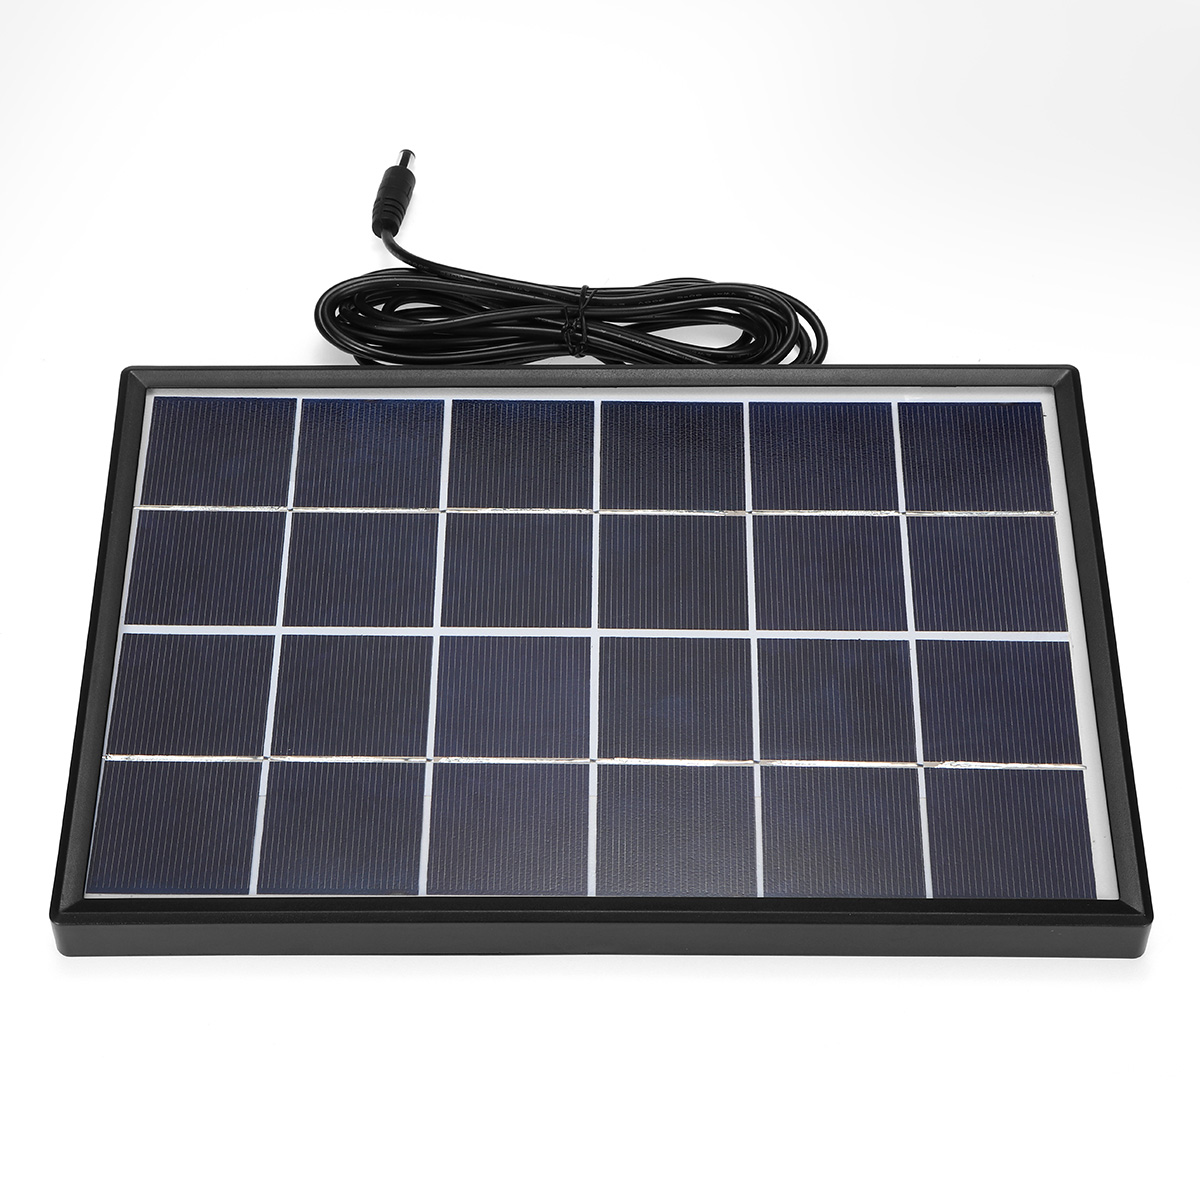 6W 6V 266*175*17mm Polysilicon Solar Panel with Cable & Border 25